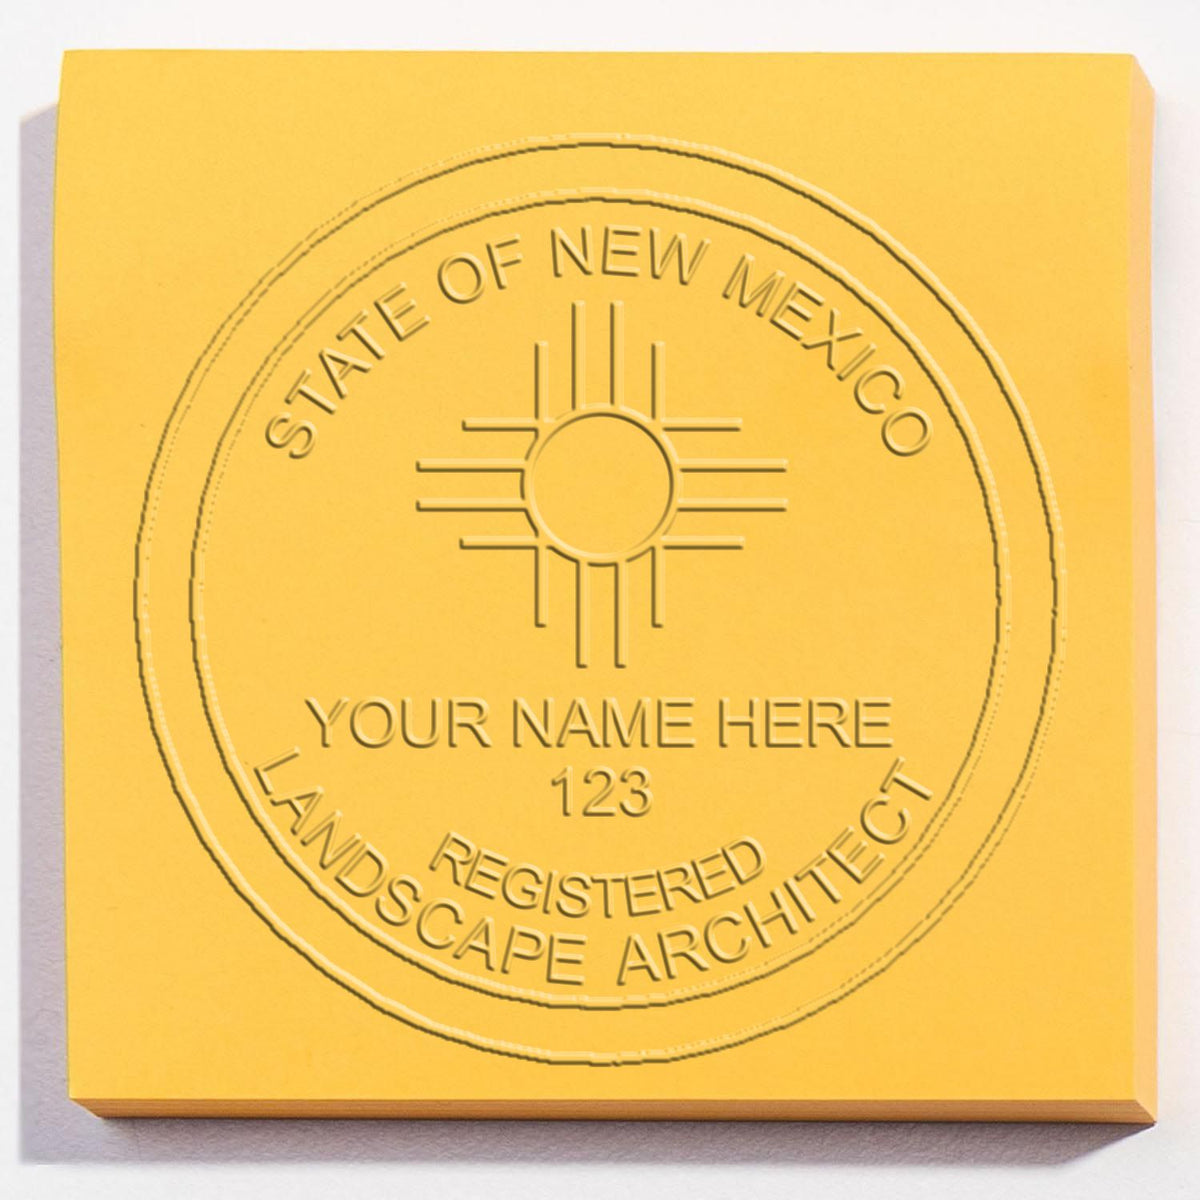 The Gift New Mexico Landscape Architect Seal stamp impression comes to life with a crisp, detailed image stamped on paper - showcasing true professional quality.